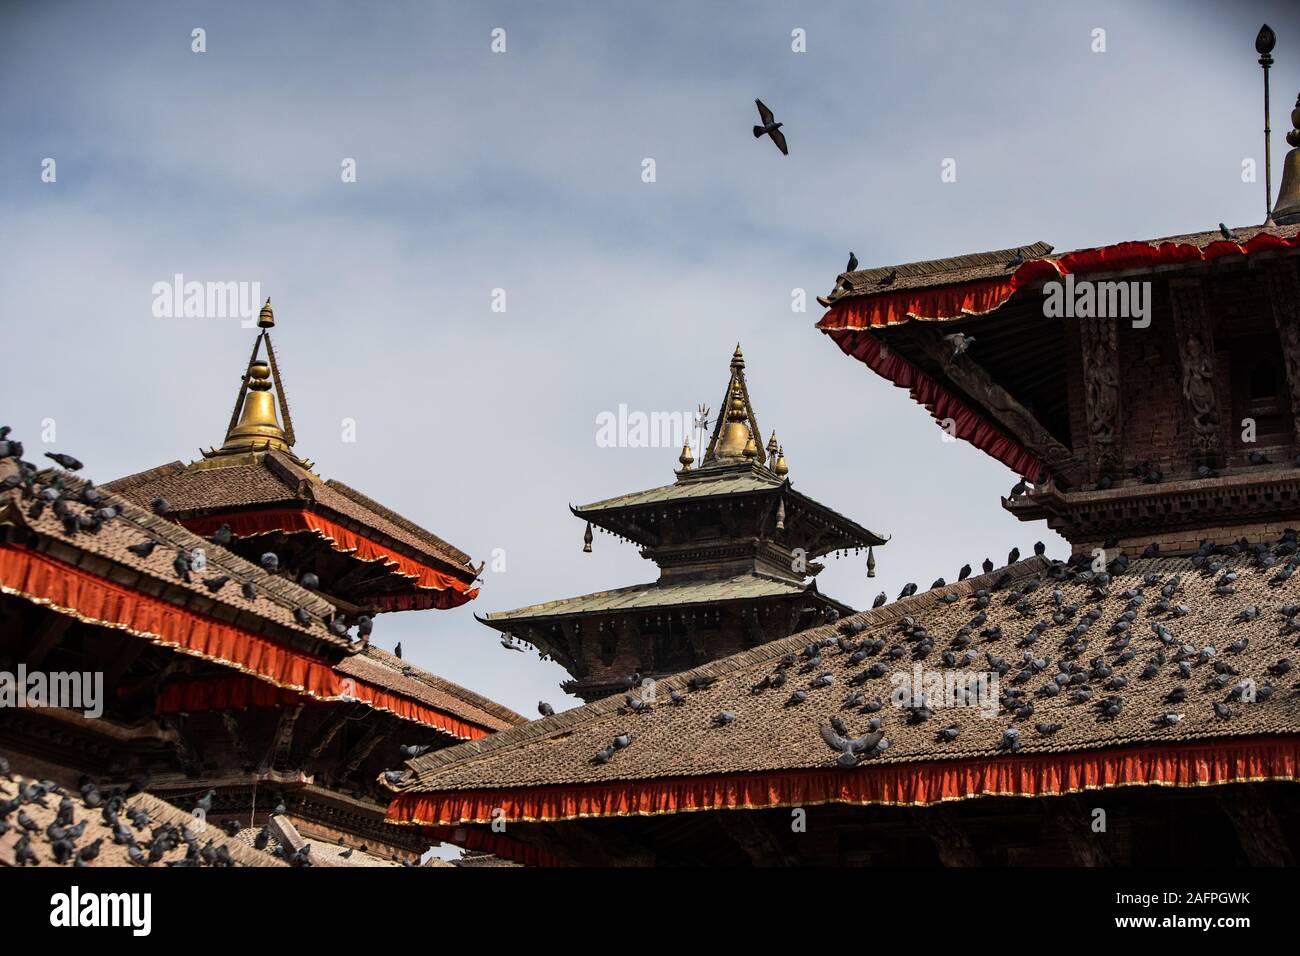 Pigeons surround the temples in Durbar Square Nepal Stock Photo